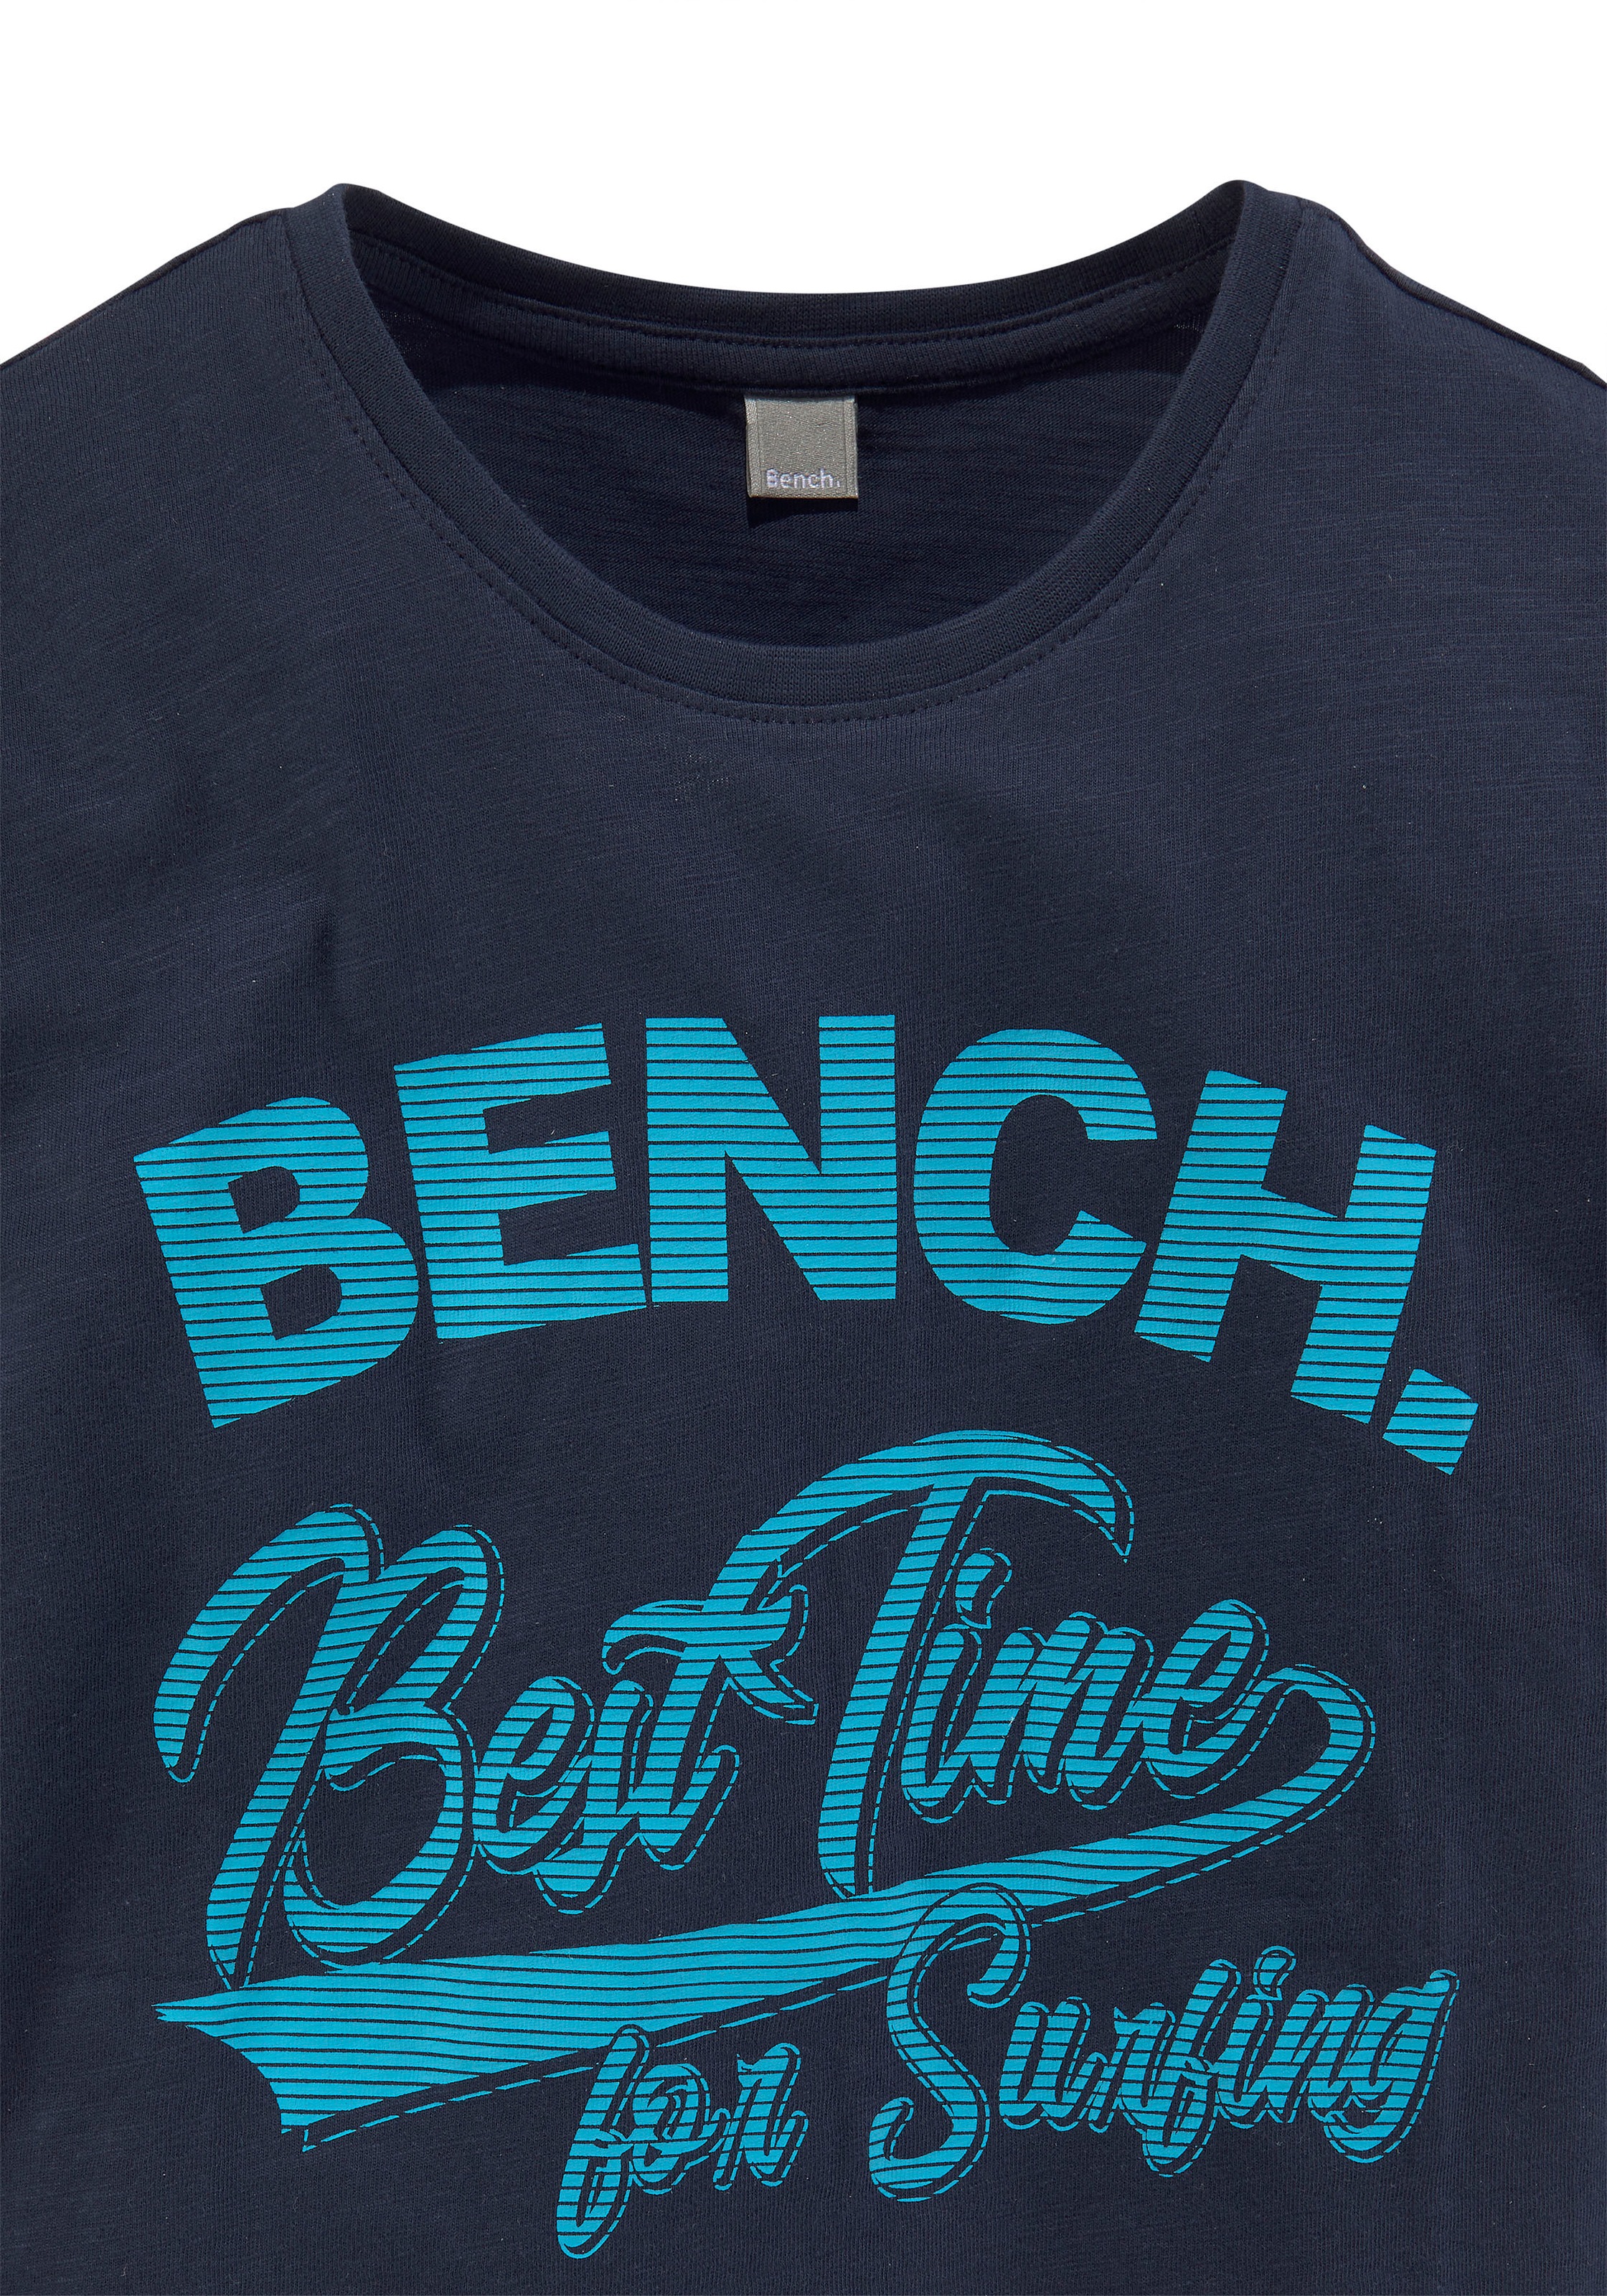 T-Shirt bei Bench. surfing« OTTO »Best for time